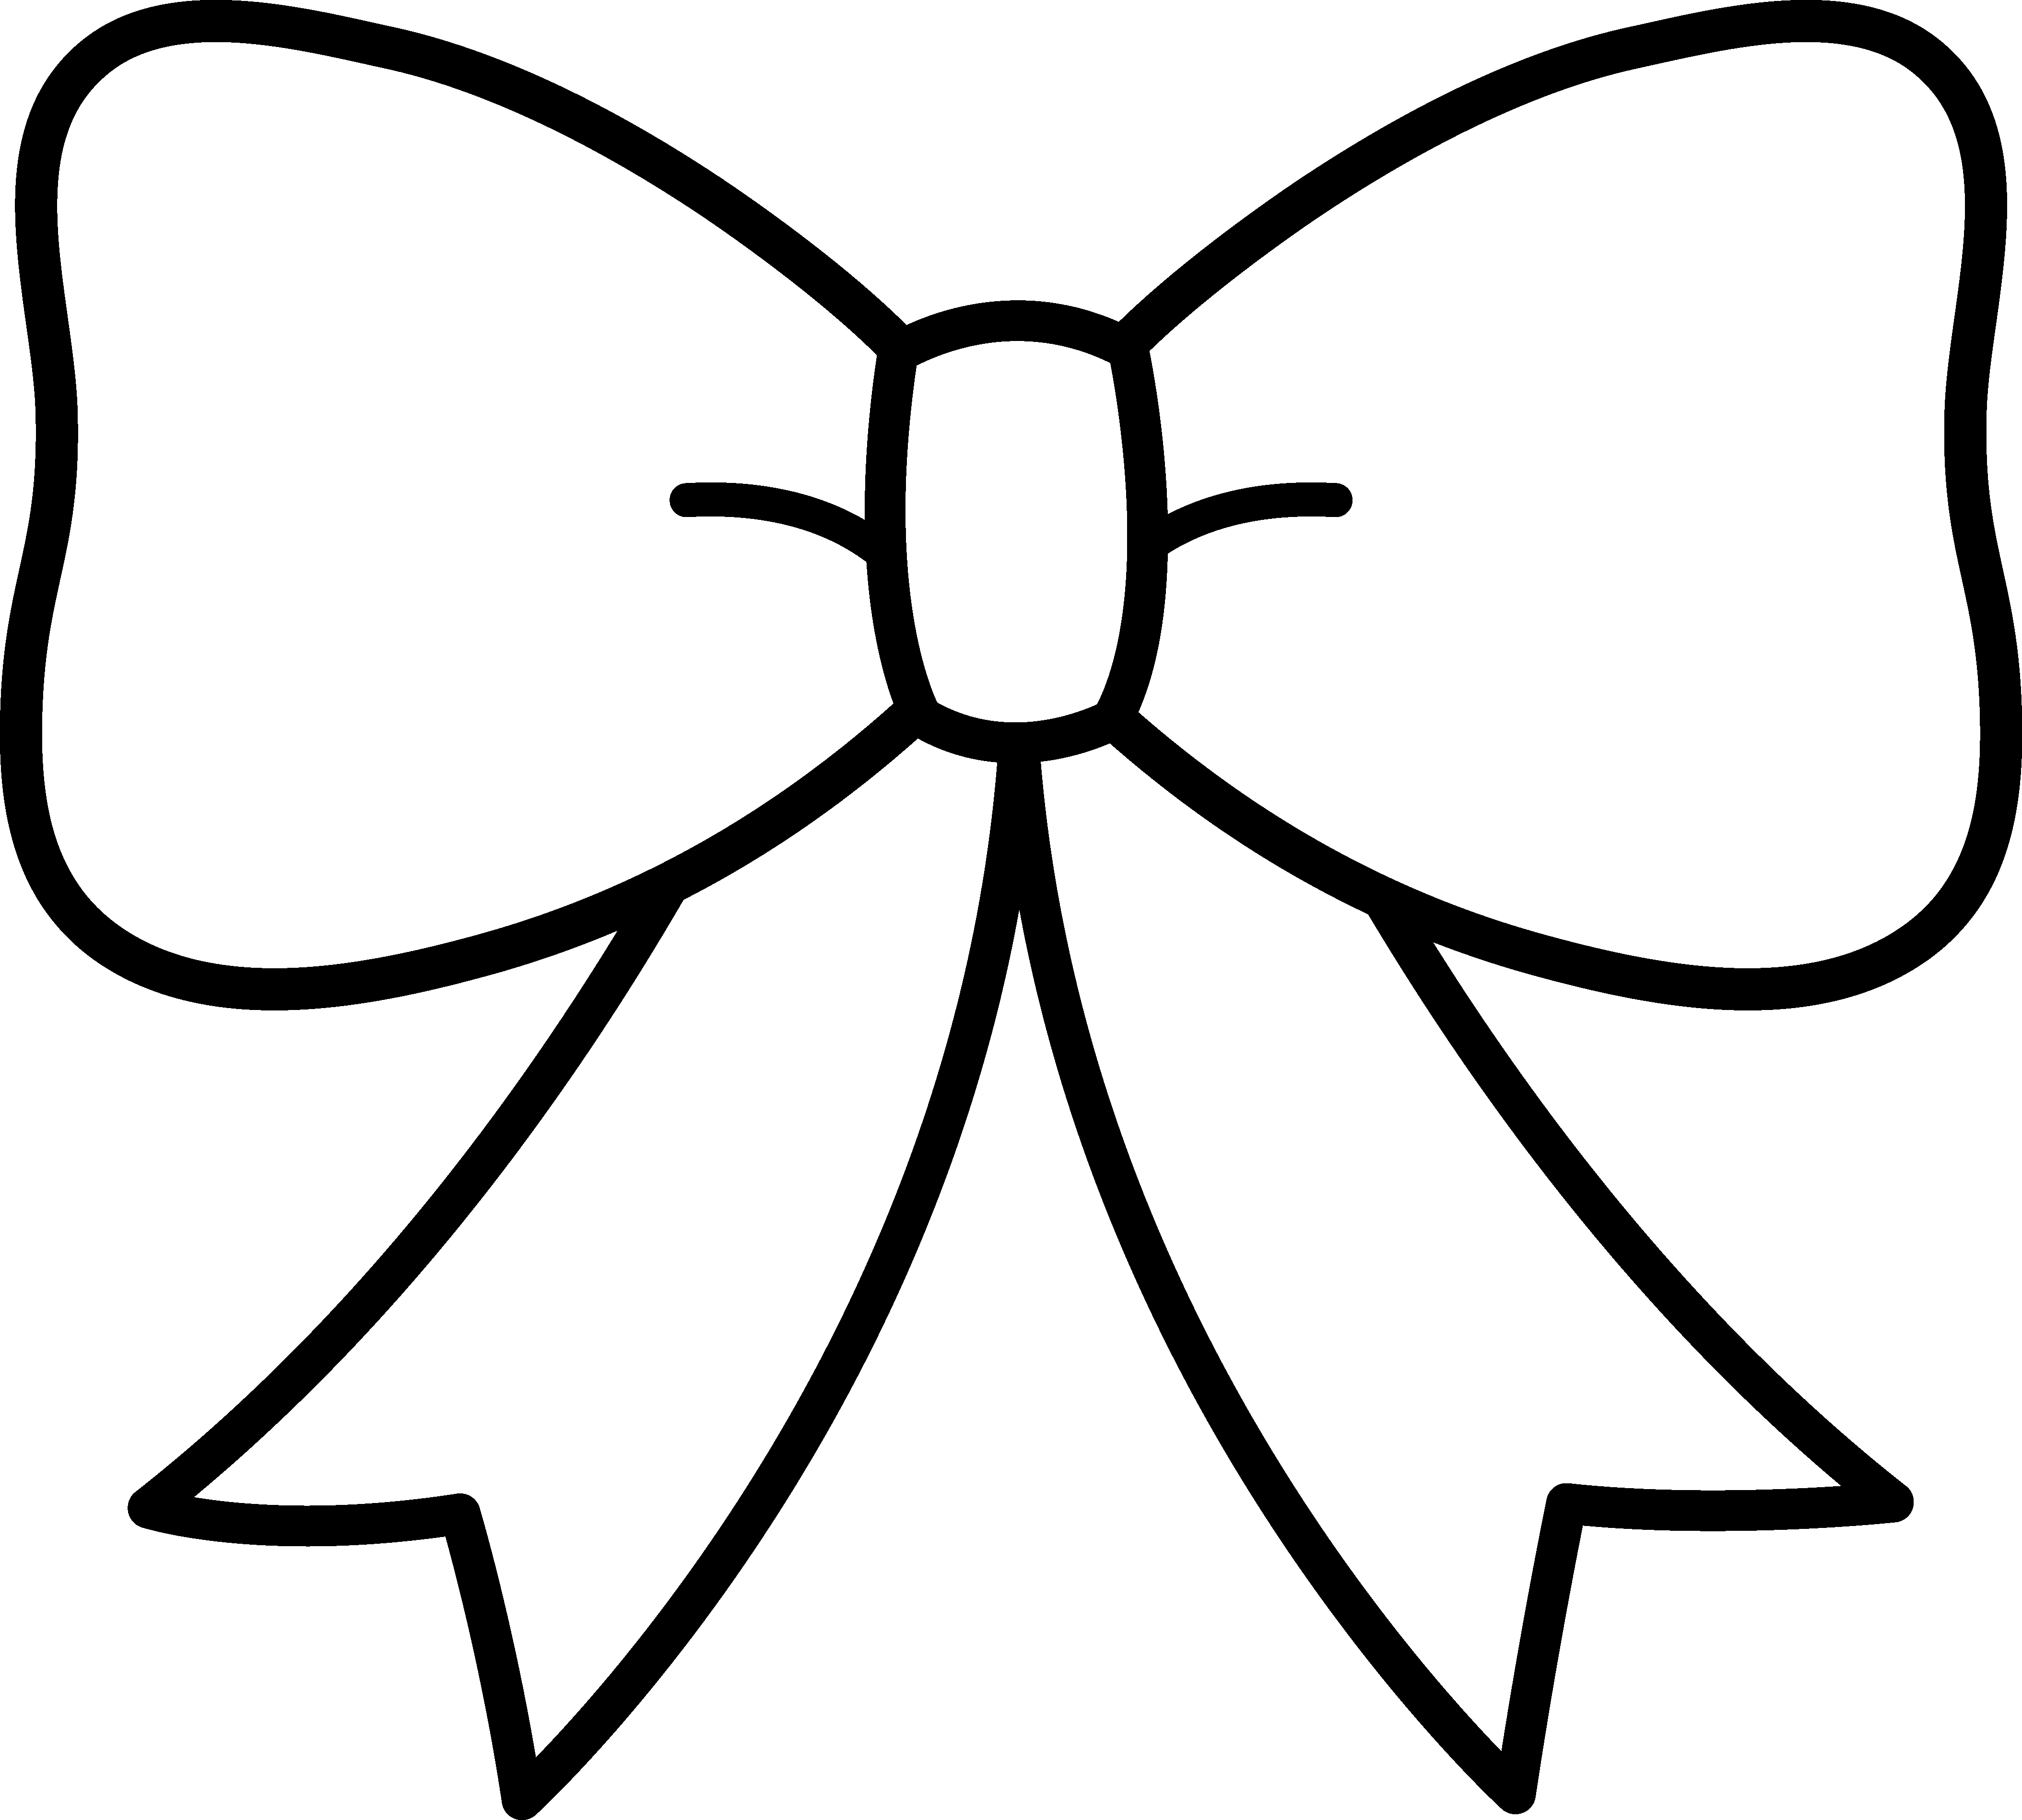 Bow black and white. E clipart outline